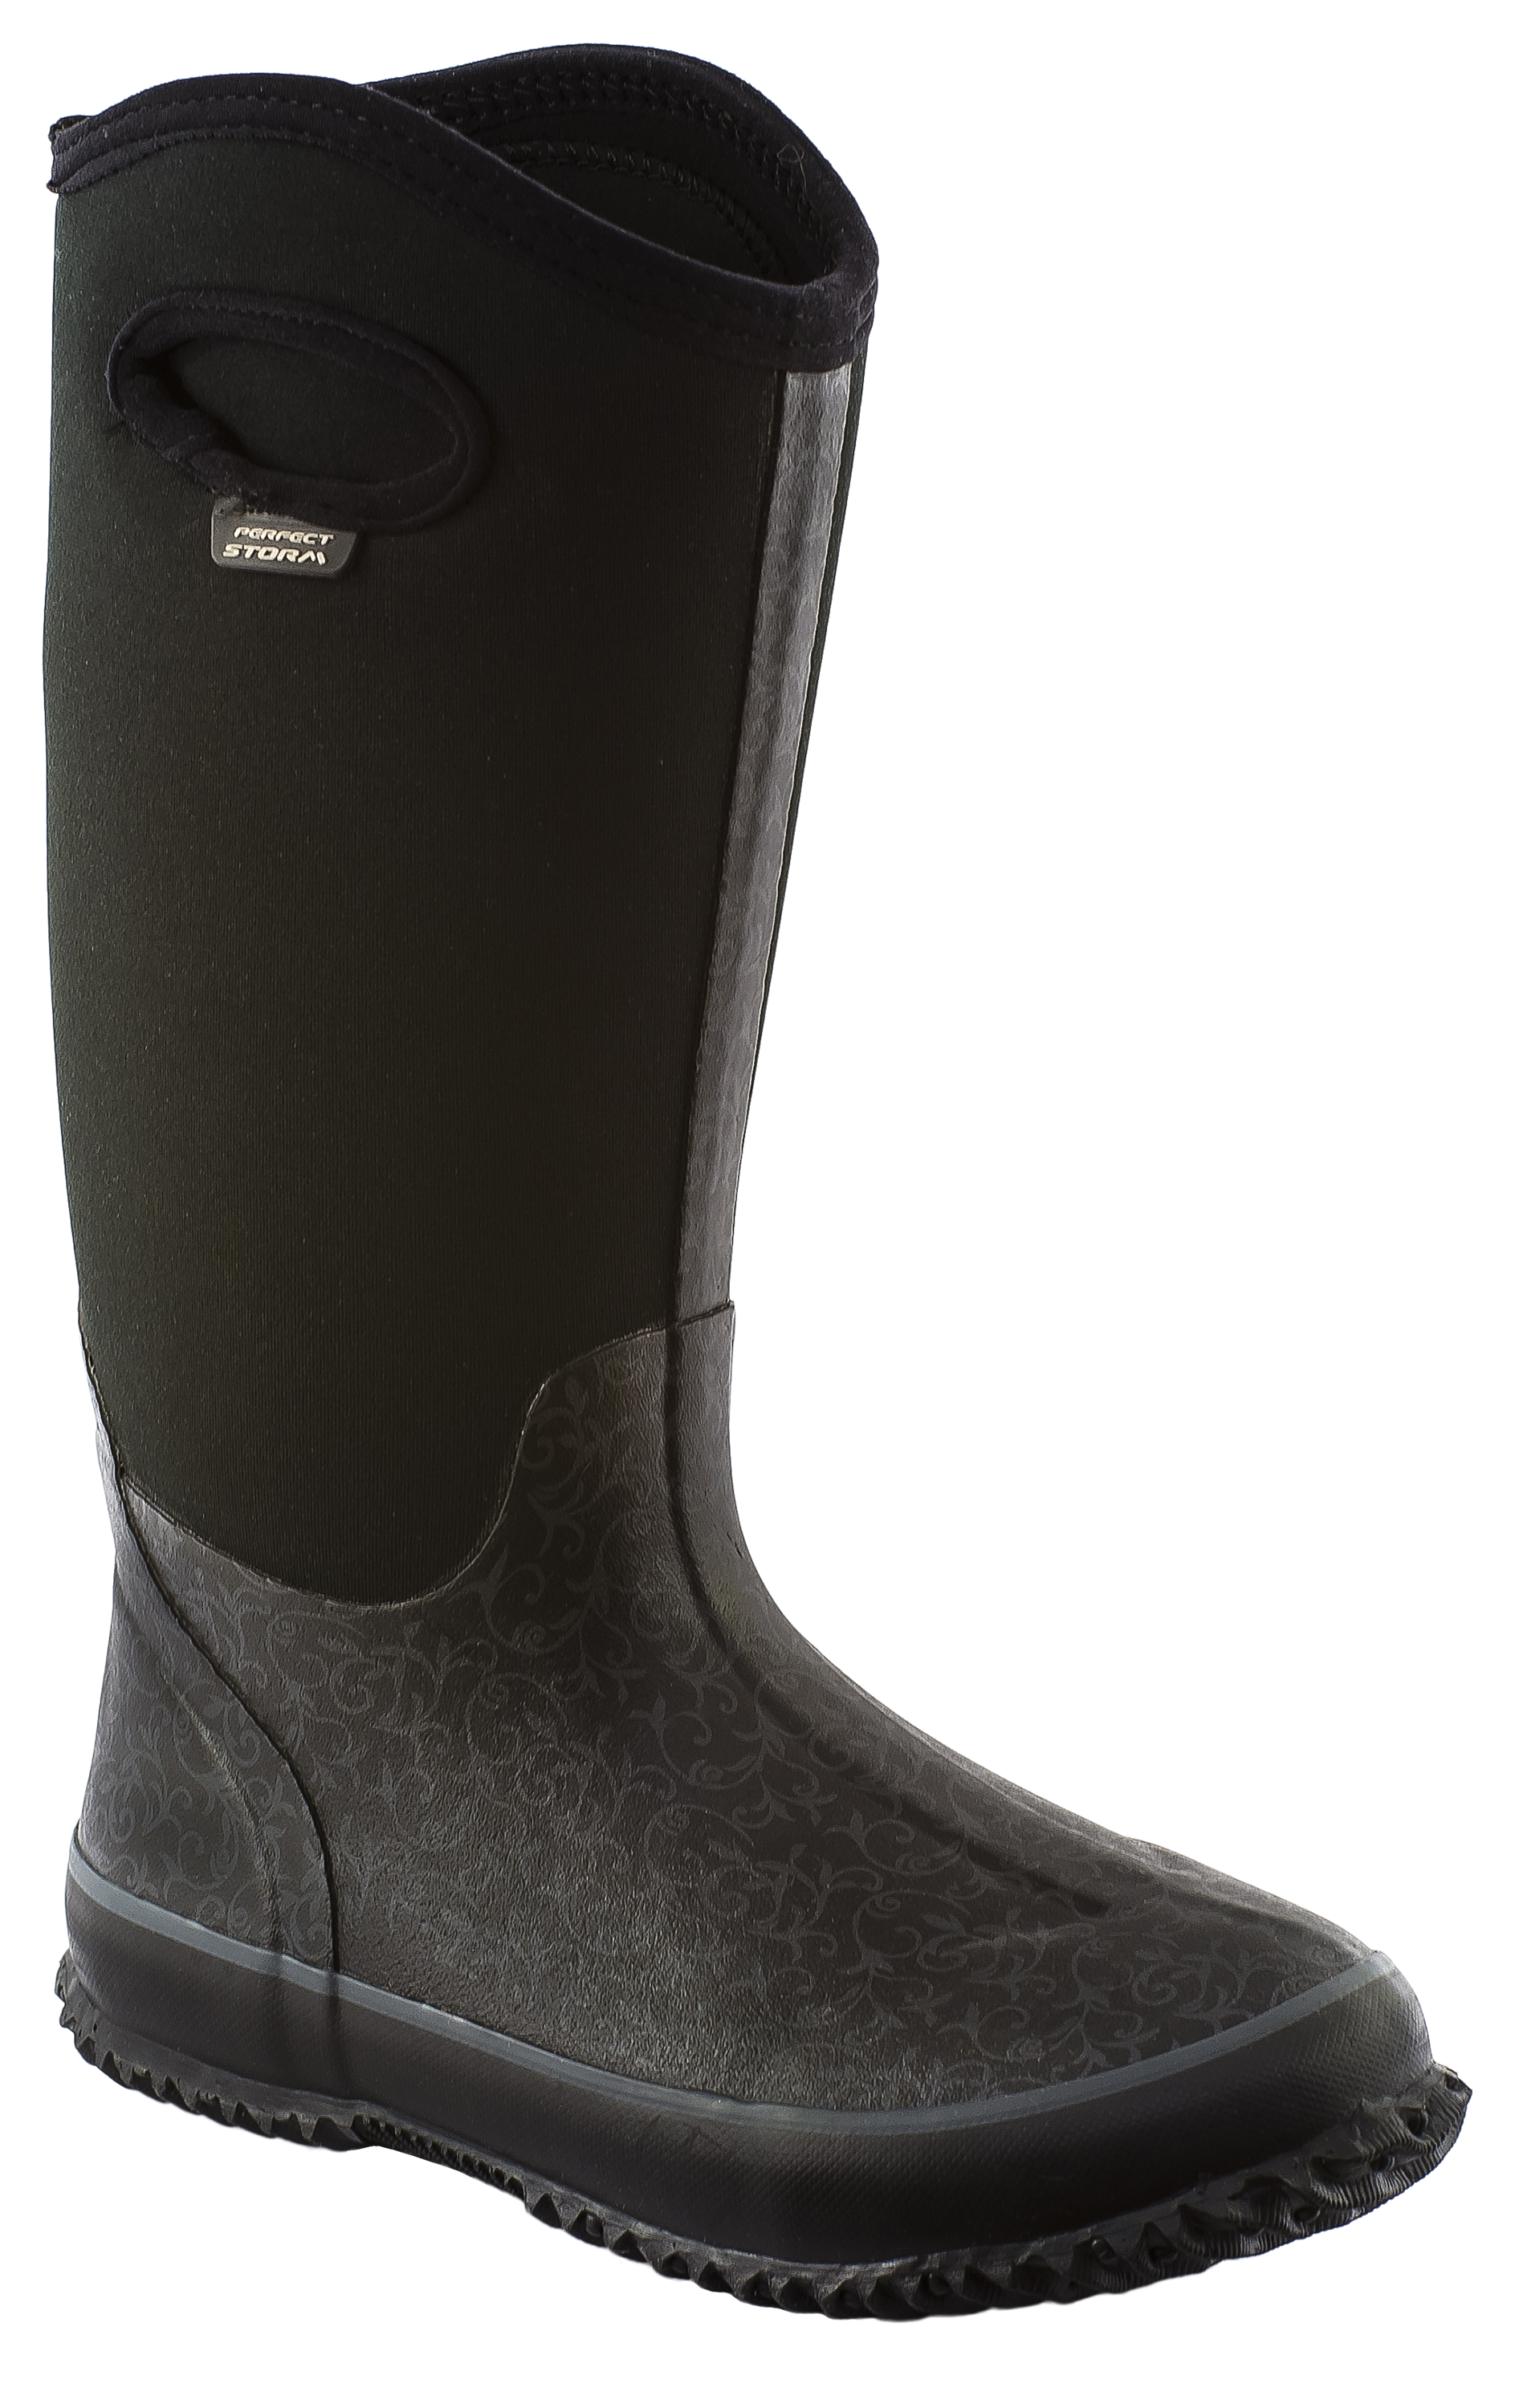 Perfect Storm Cloud High Waterproof Boots for Ladies | Bass Pro Shops